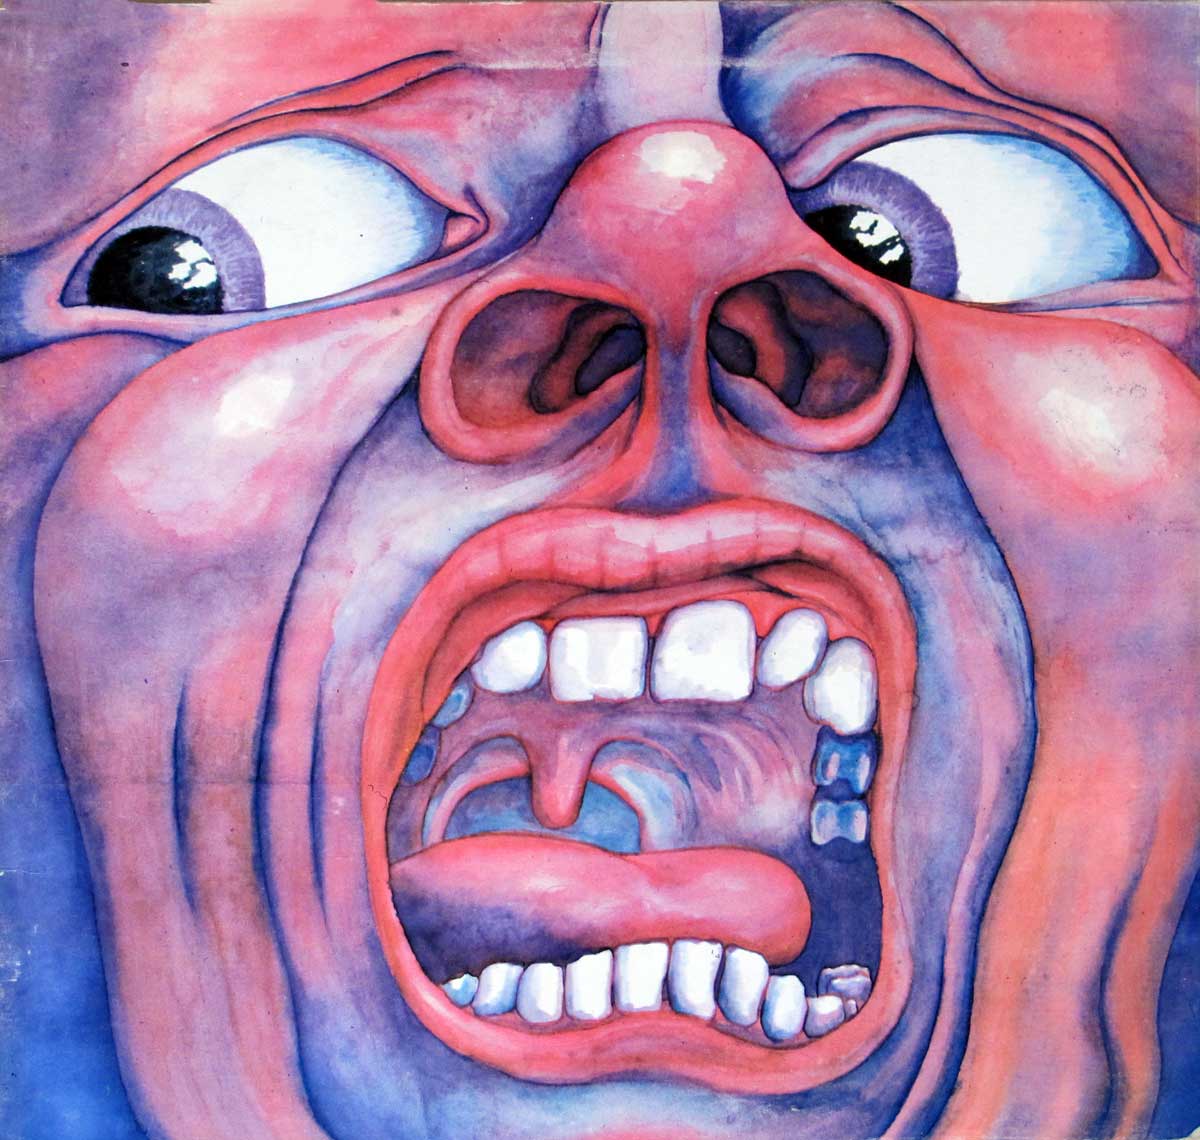 Thumbnail of KING CRIMSON - In The Court Of The Crimson King album front cover